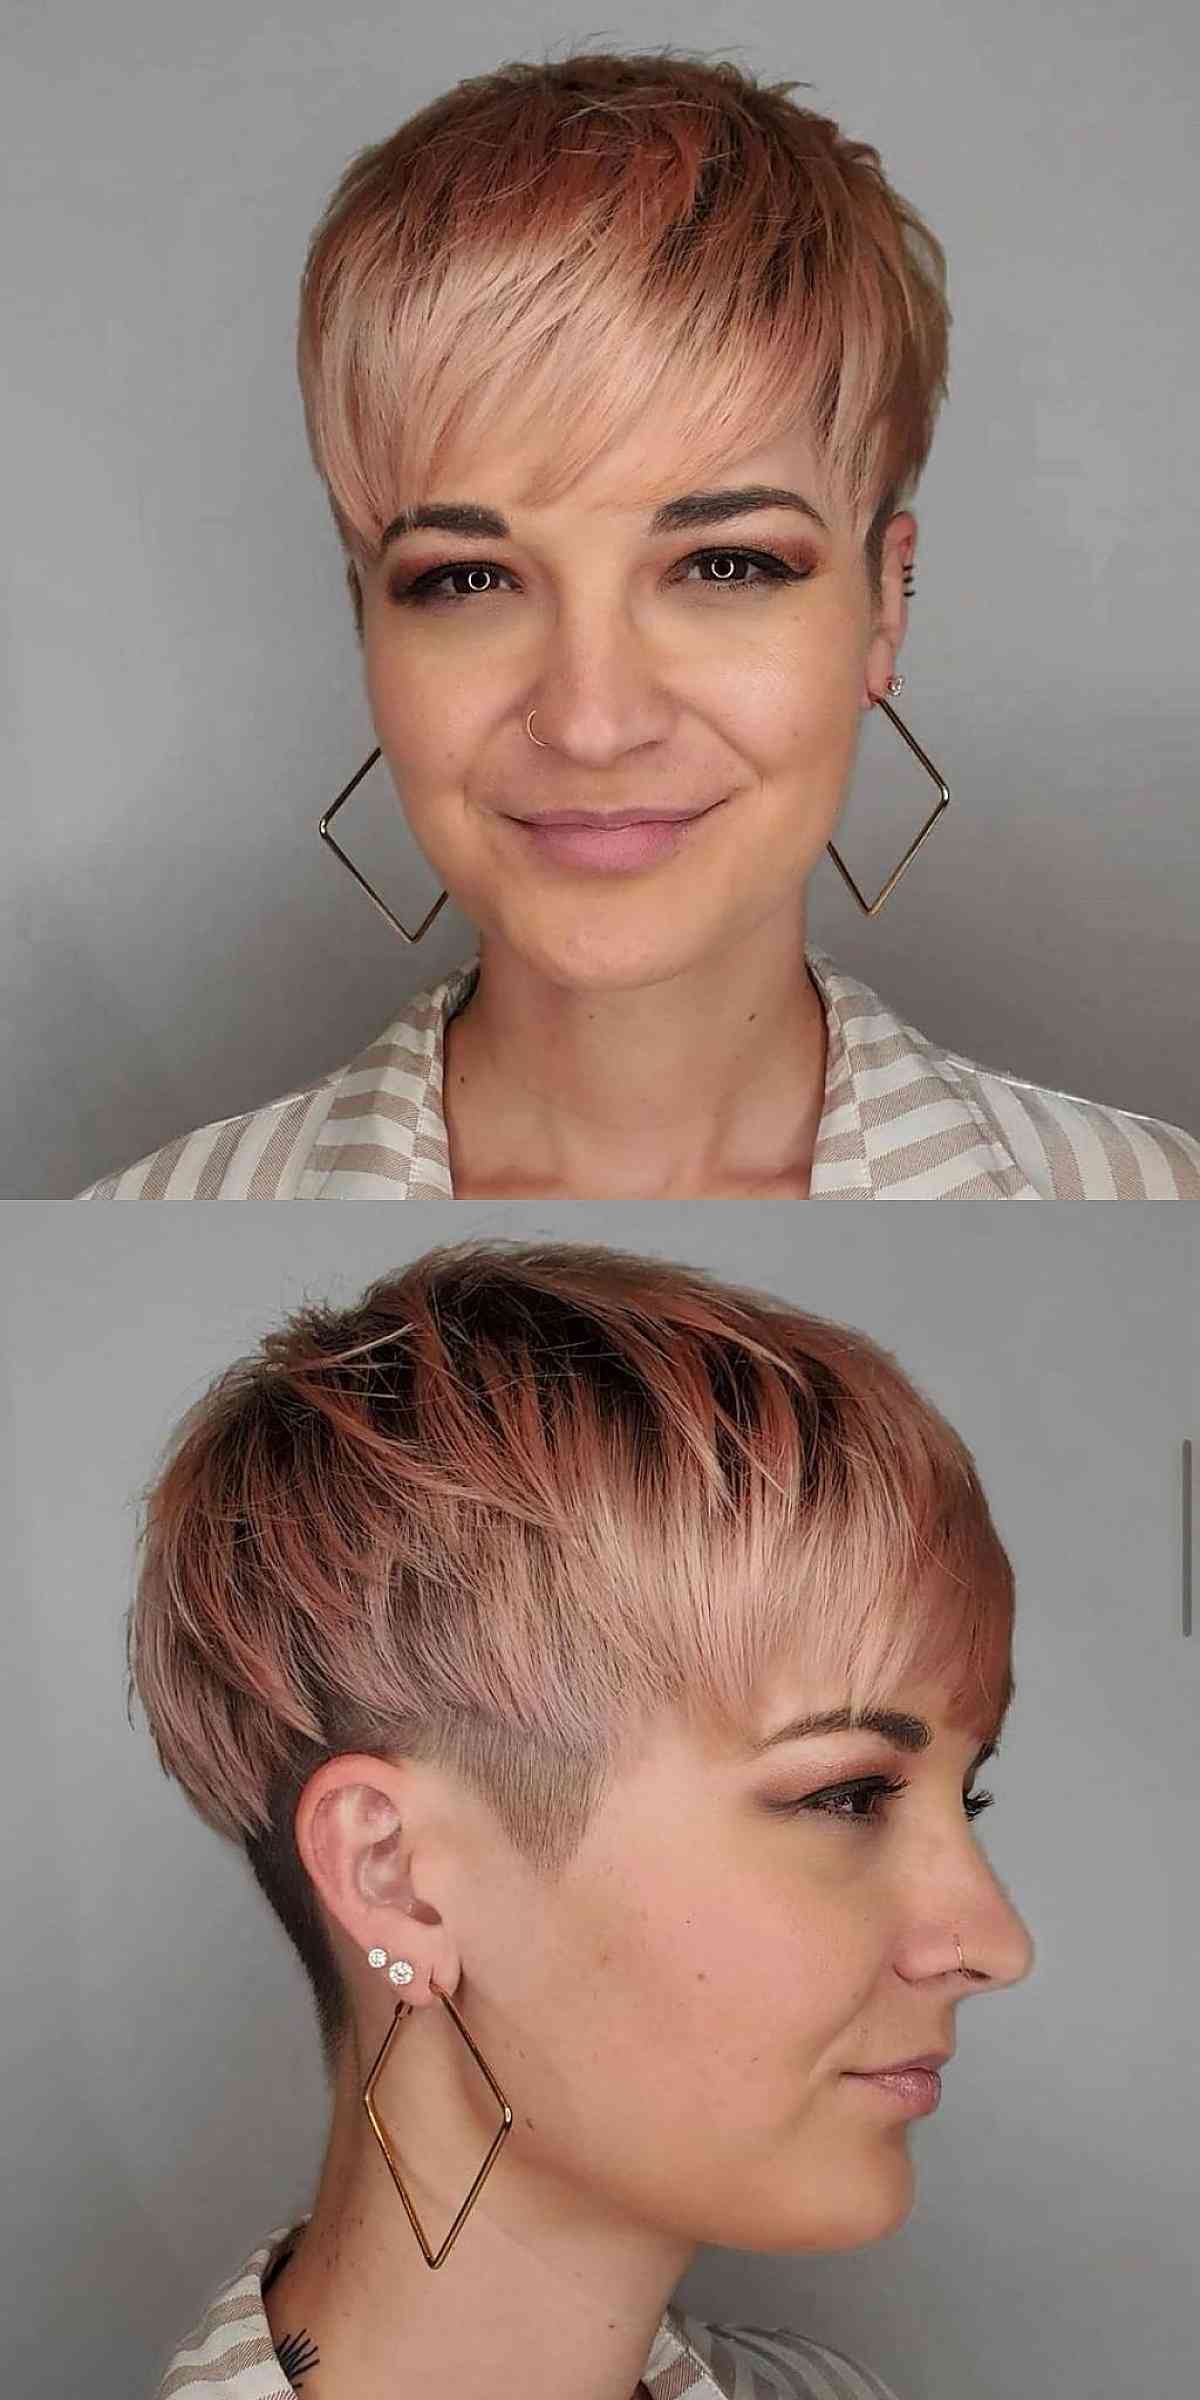 Classic Pixie Cut for Girly Girls